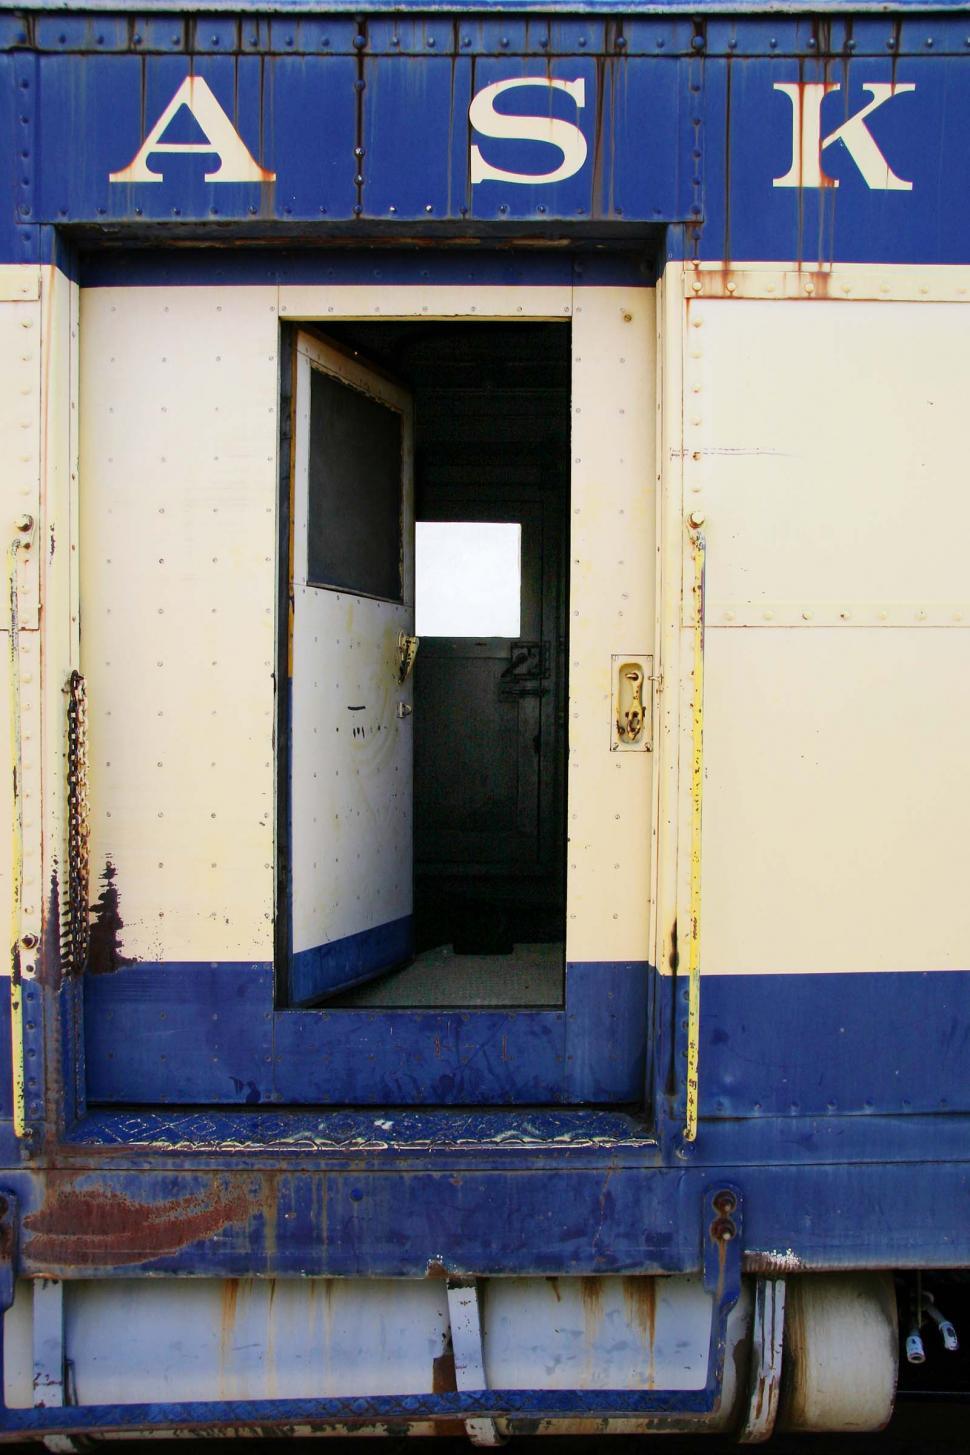 Free Image of Blue and White Train Car With Open Door 